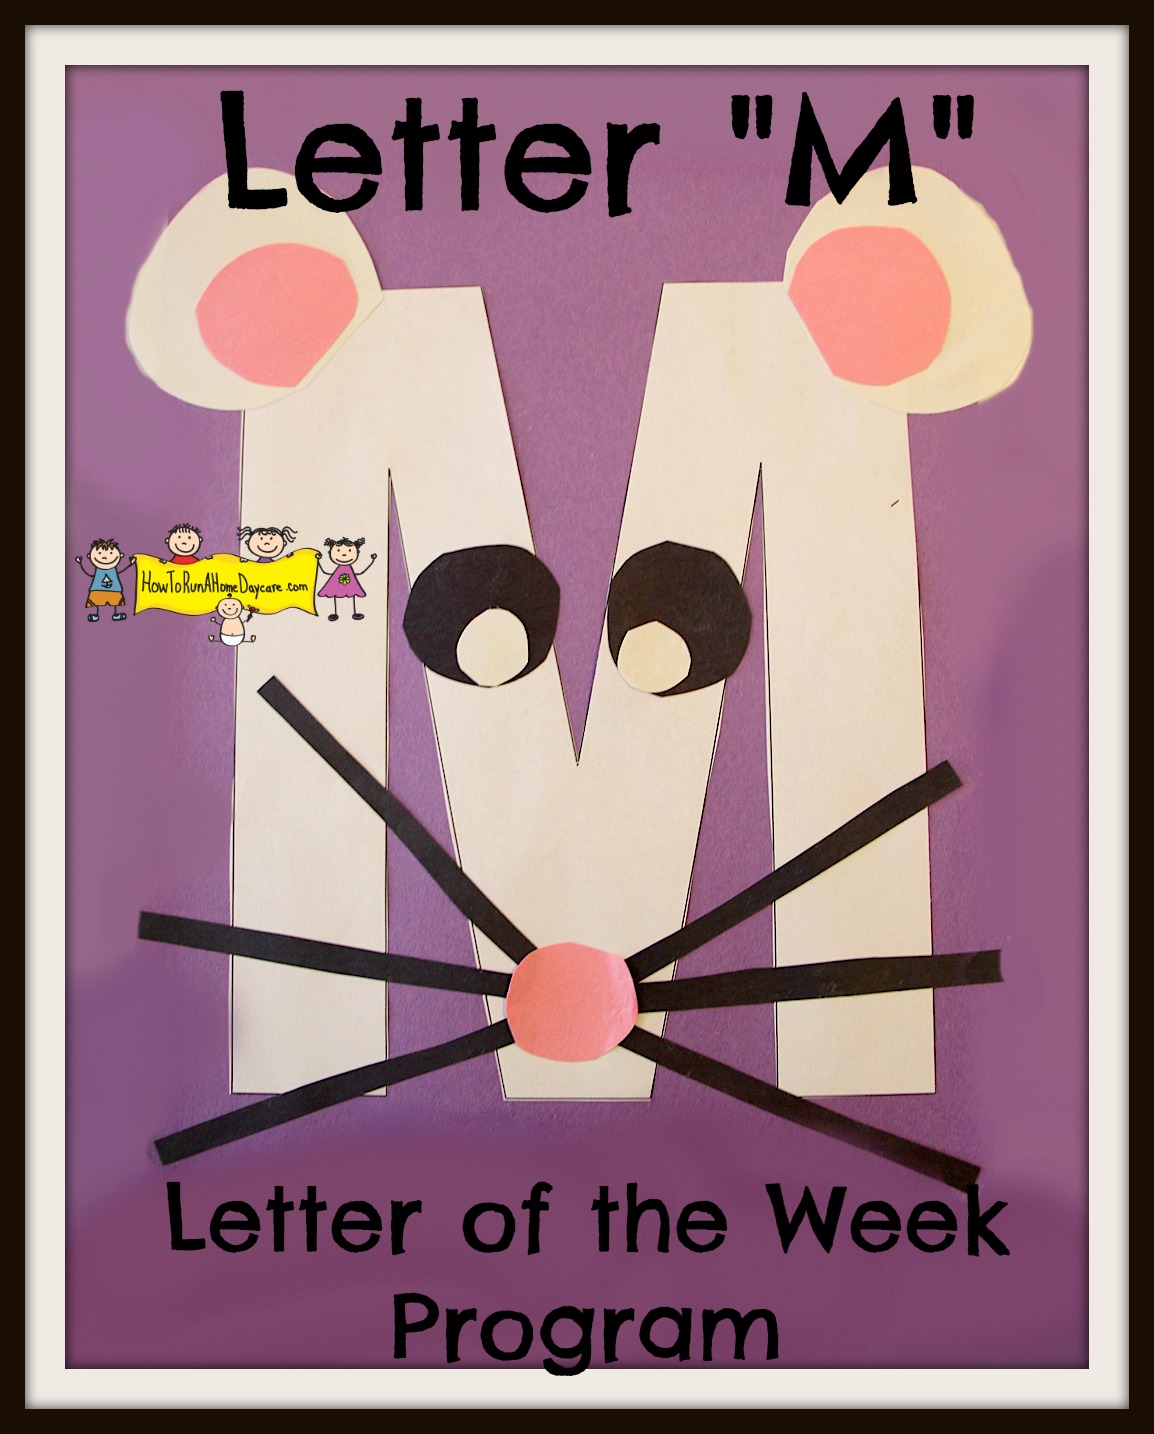 Letter "M" Letter of the Week Program How To Run A Home